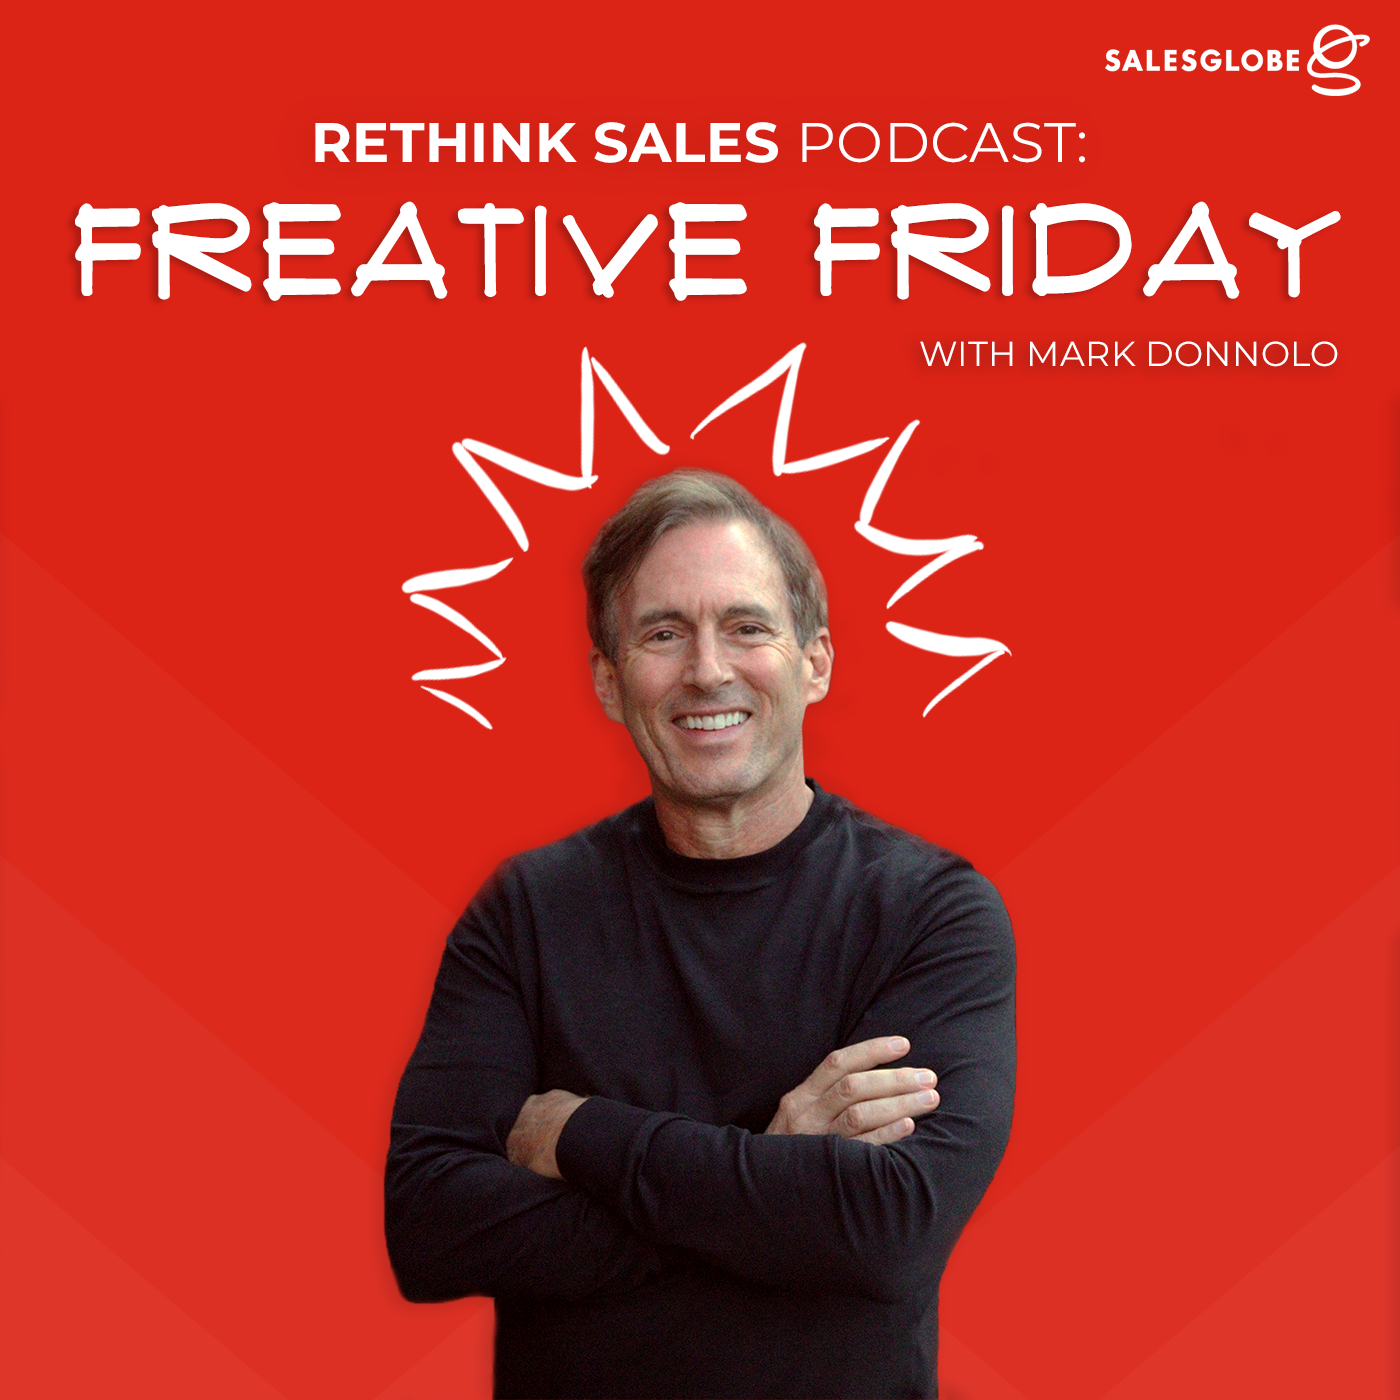 69: Freative Friday - Leveraging Talent to Increase Your ROSI